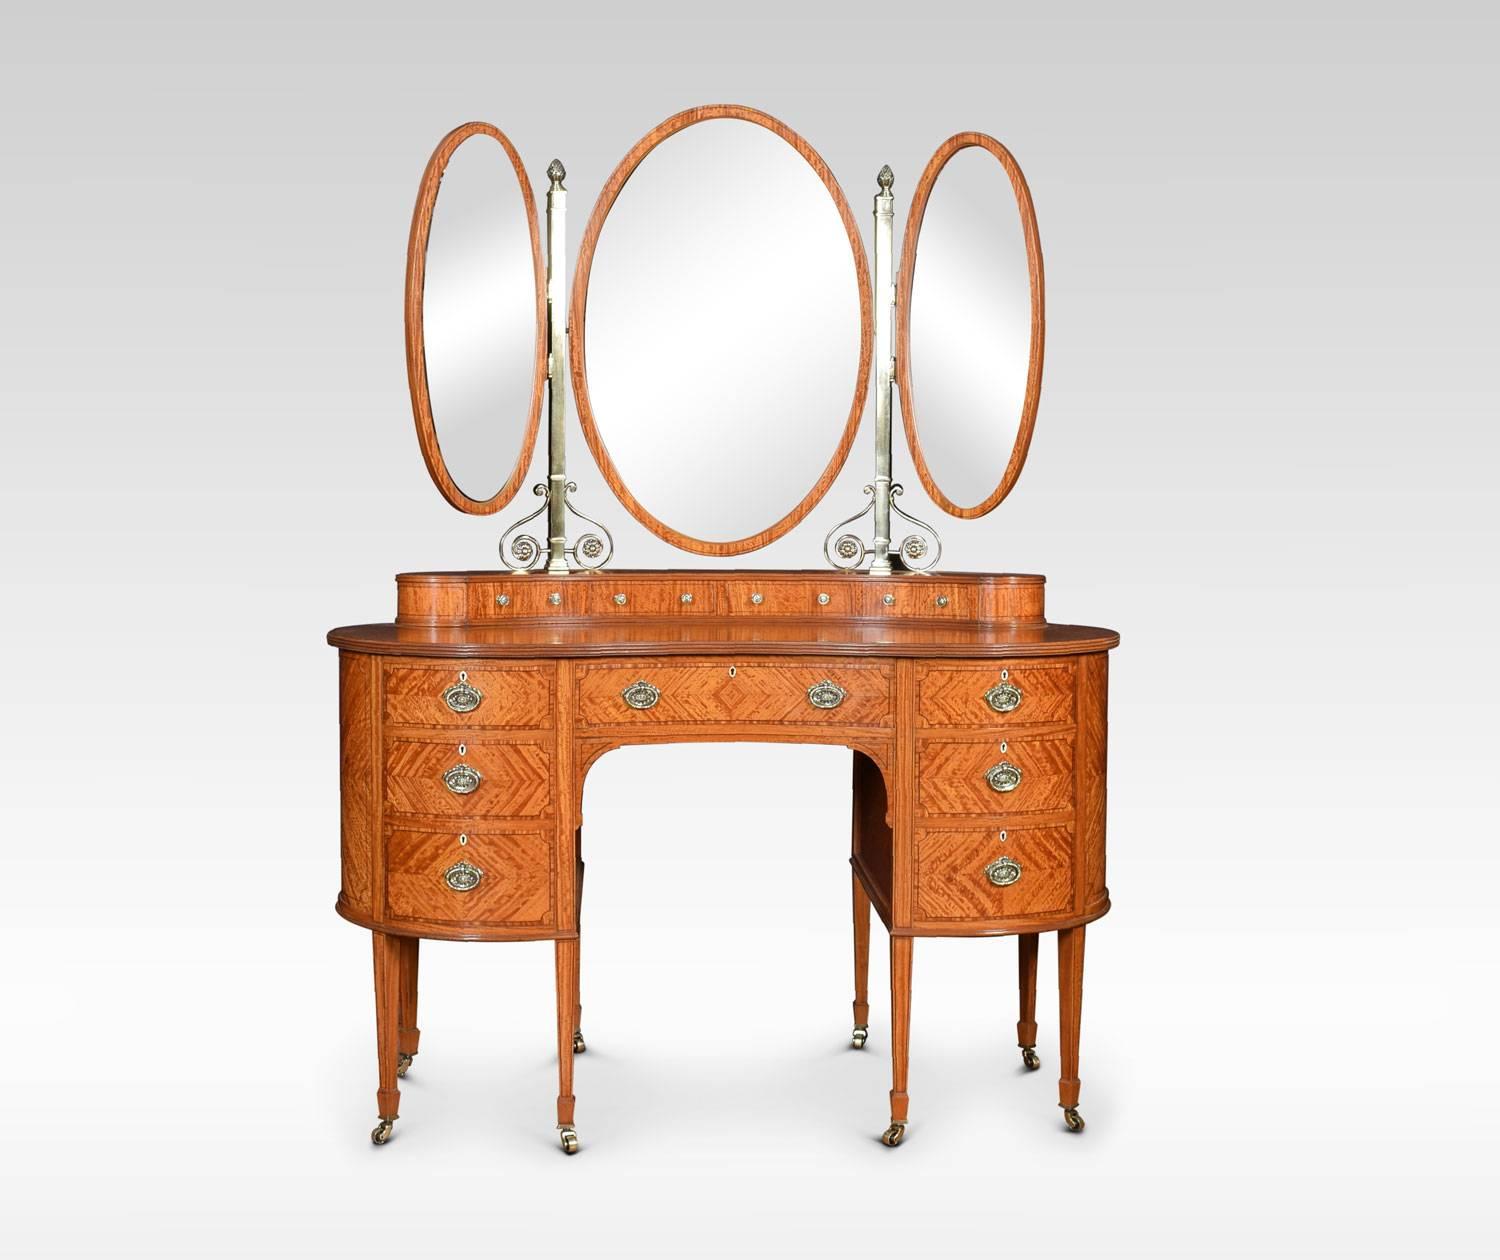 Satinwood string inlaid kidney shaped dressing table, having an ornate brass superstructure with acorn capitals. The central oval mirror having adjustable smaller mirrors to either side. Above three short draws with brass knob handles. The base with